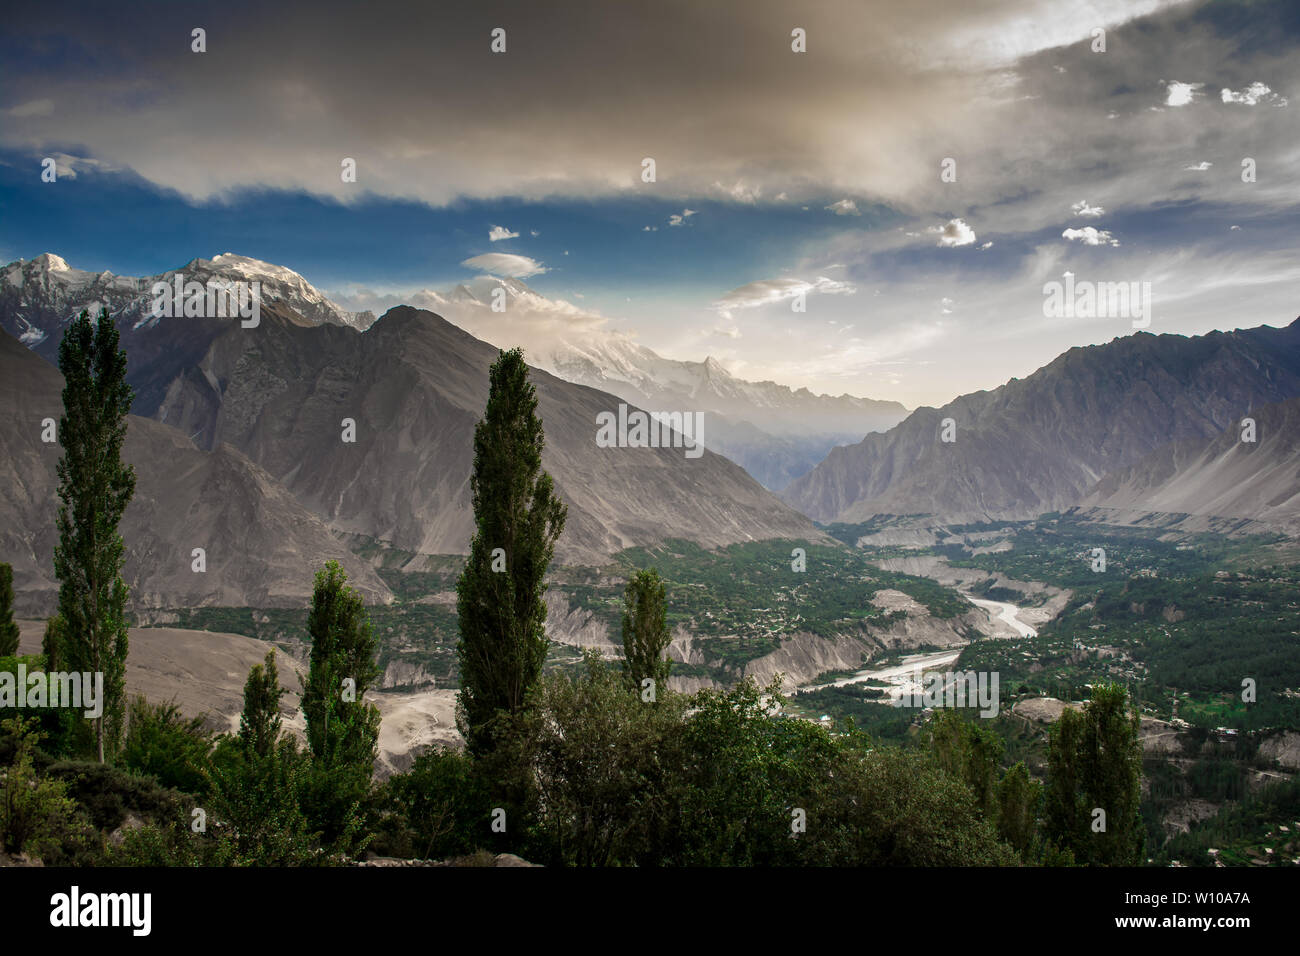 Bird's Eye View of Hunza Valley, Pakistan. The beautiful Hunza Valley is surrounded by Karakoram Mountains. Stock Photo